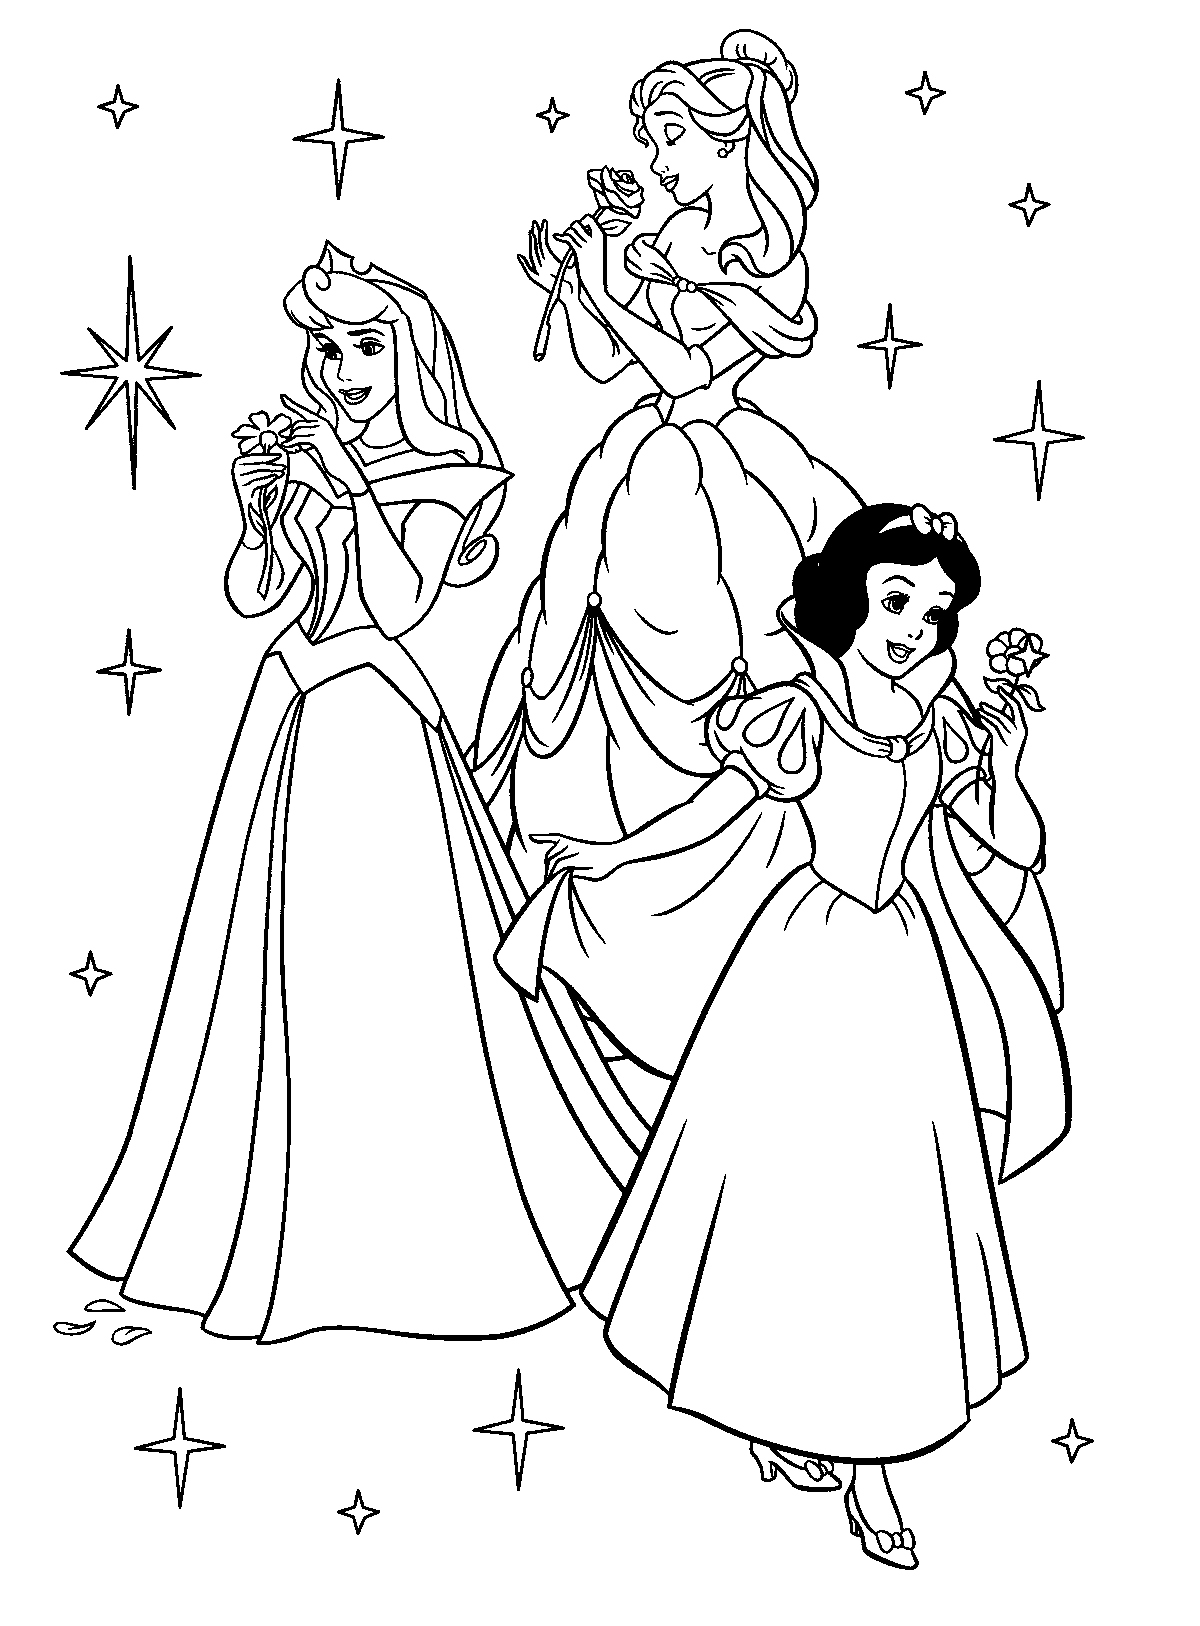 6-best-images-of-princess-coloring-printables-disney-princess-coloring-pages-disney-princess